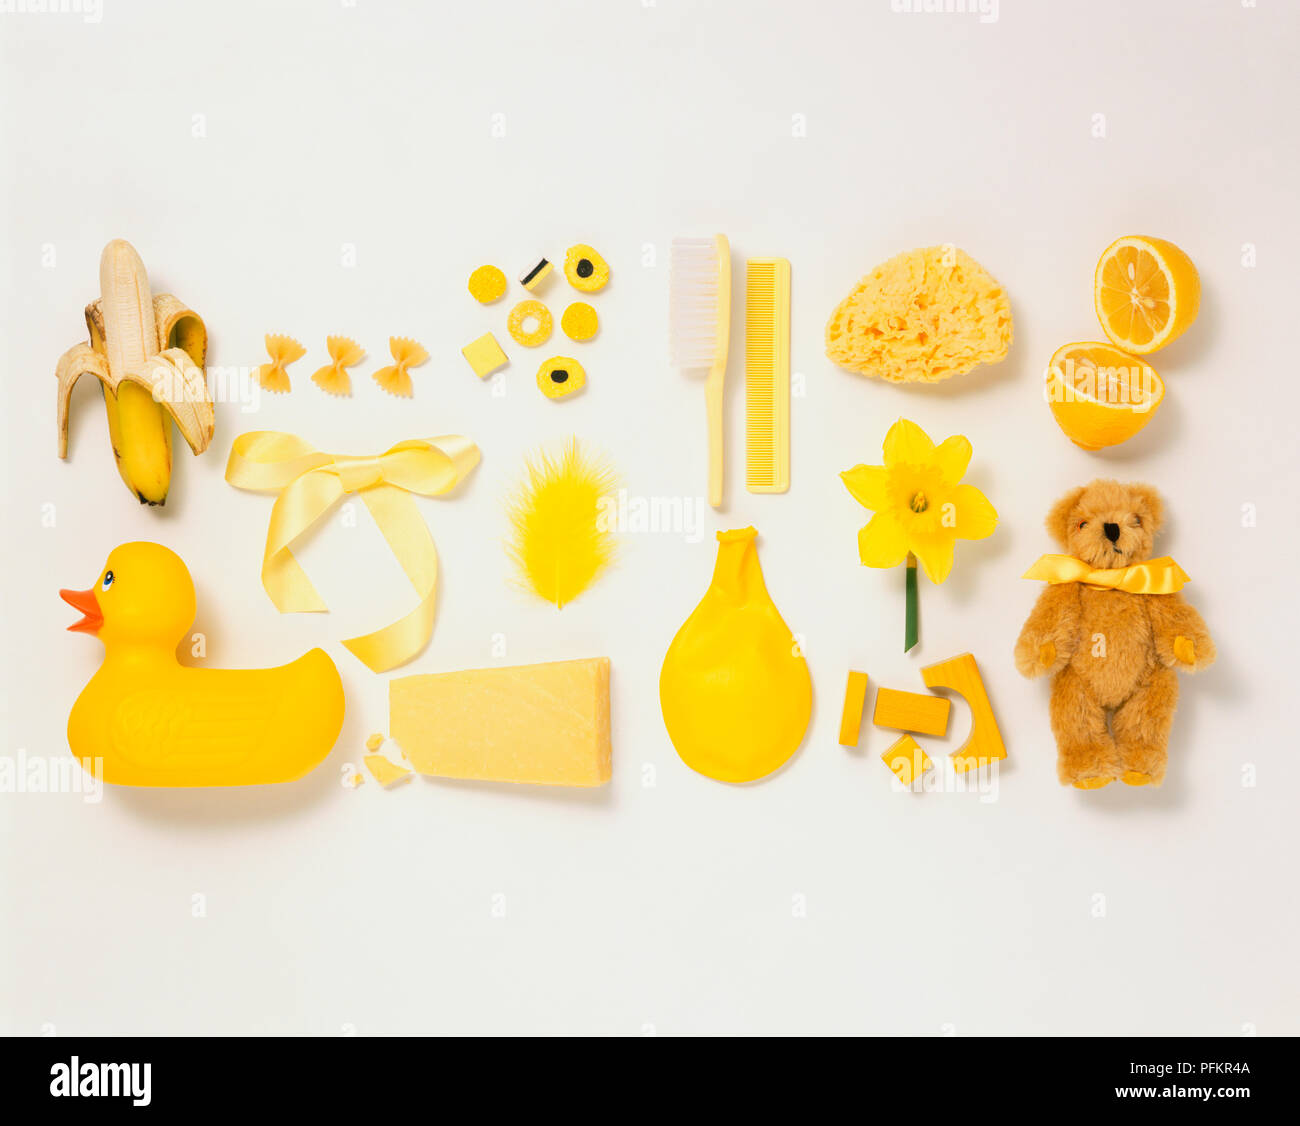 Download Yellow Objects High Resolution Stock Photography And Images Alamy